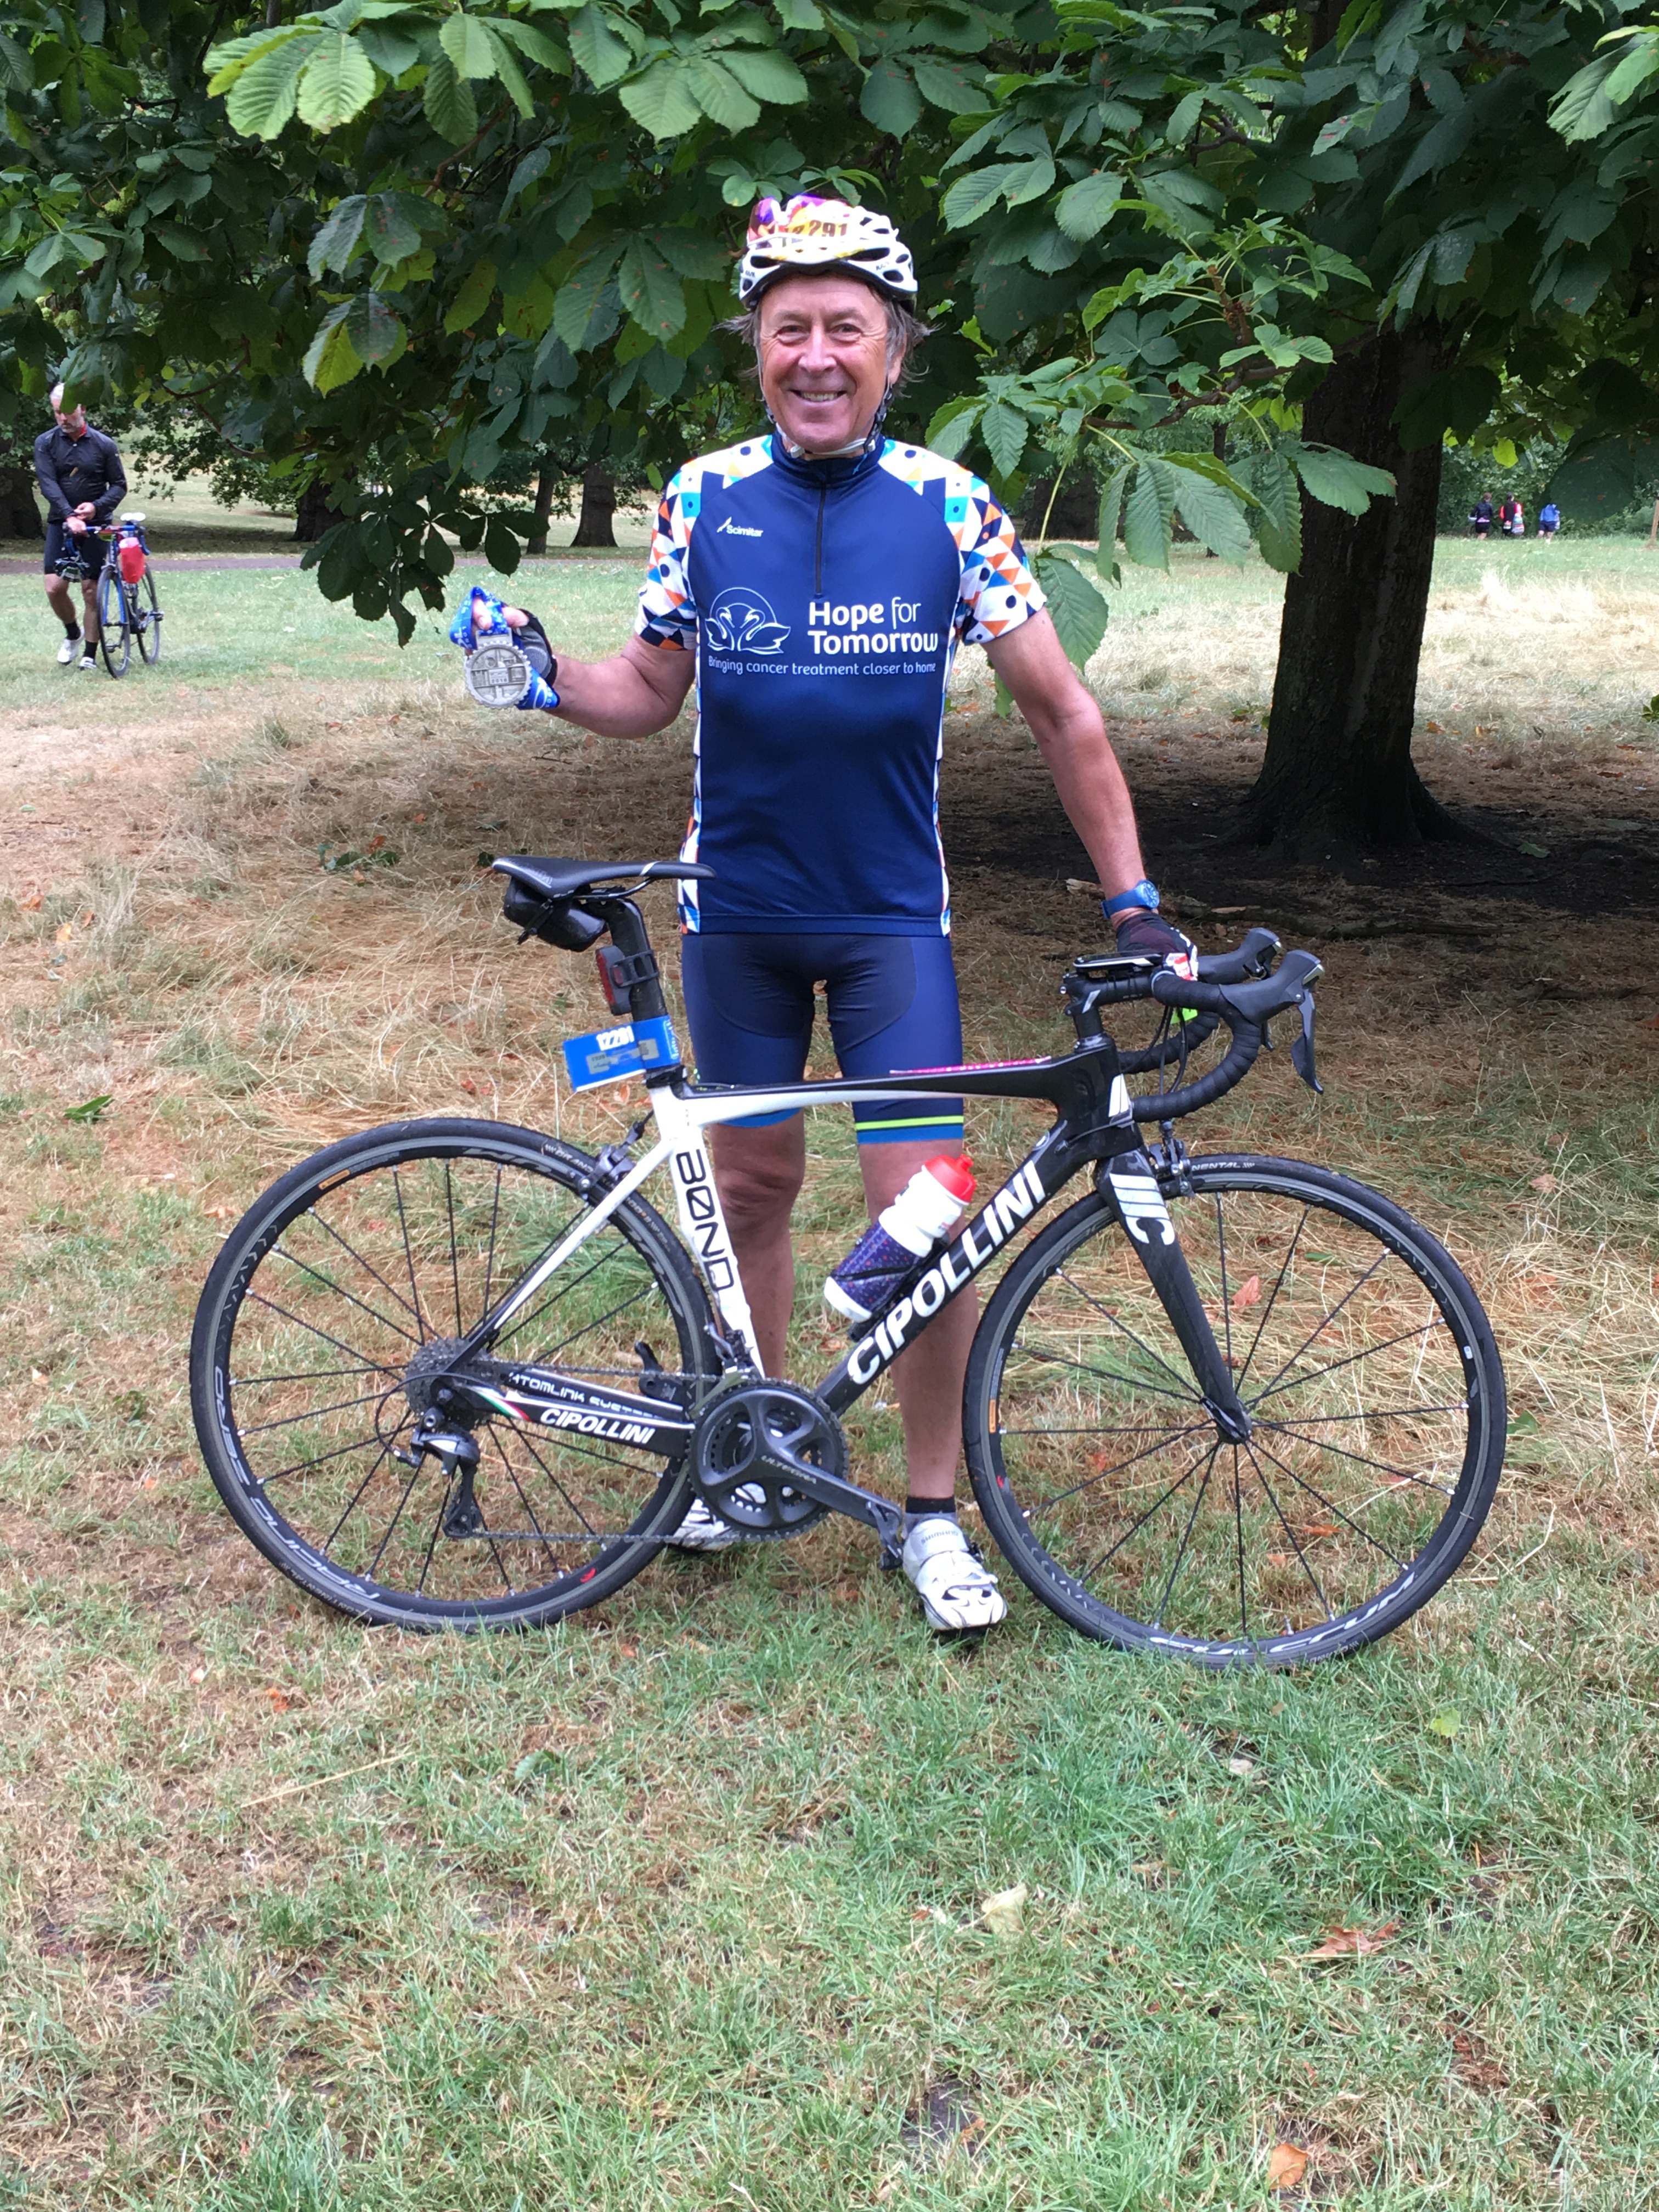 Team Hope cross the finishing line at the Prudential London – Surrey cycle challenge!